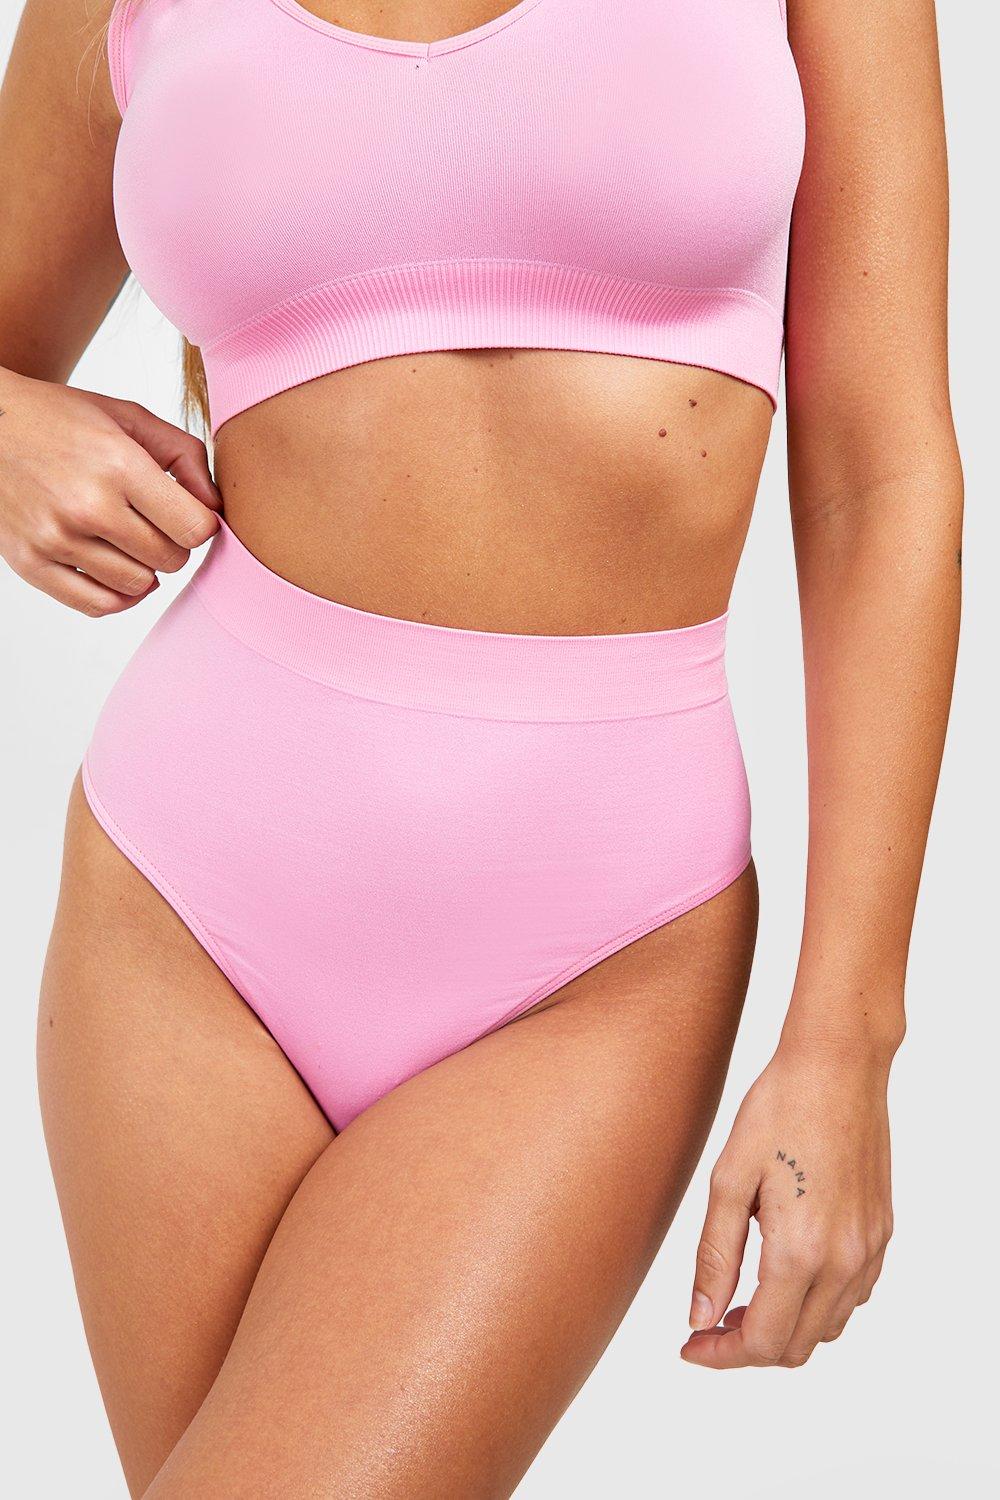 https://media.boohoo.com/i/boohoo/gzz51718_pink_xl_3/femme-pink-string-taille-haute-sans-coutures